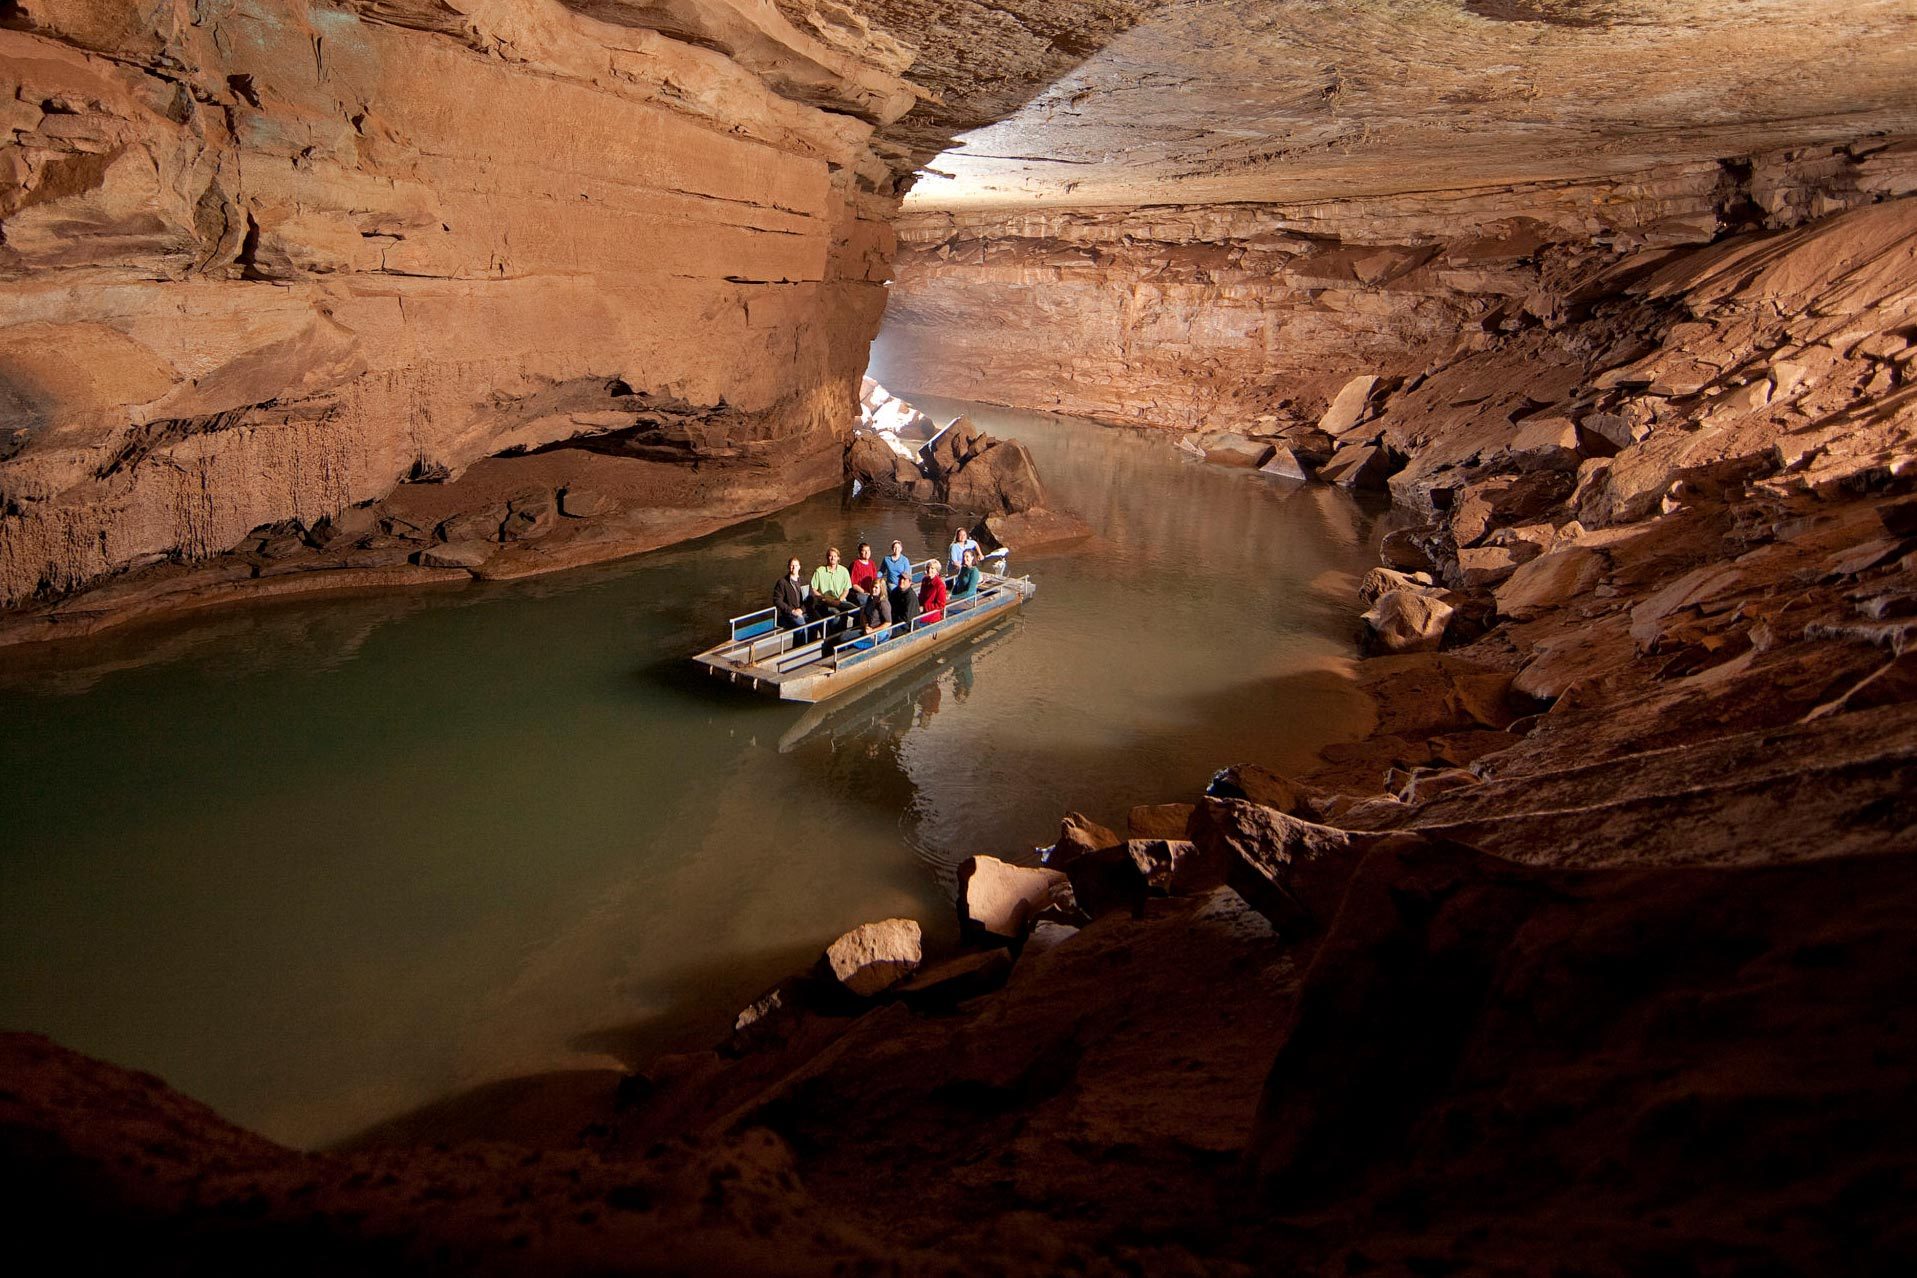 <p>This 70-acre gem features the only underground river cave tour in Kentucky. In addition to some cool history—the caves were a campsite for nomadic groups and a shelter for troops during the Civil War—the <a href="https://www.tripadvisor.com/Attraction_Review-g39214-d287741-Reviews-Lost_River_Cave-Bowling_Green_Kentucky.html" rel="noopener">Lost River Cave</a> includes meadowlands, wetlands and trails. Tours are available seven days a week, and the park is closed on major winter holidays.</p> <p class="listicle-page__cta-button-shop"><a class="shop-btn" href="https://www.tripadvisor.com/Attraction_Review-g39214-d287741-Reviews-Lost_River_Cave-Bowling_Green_Kentucky.html">Learn More</a></p>